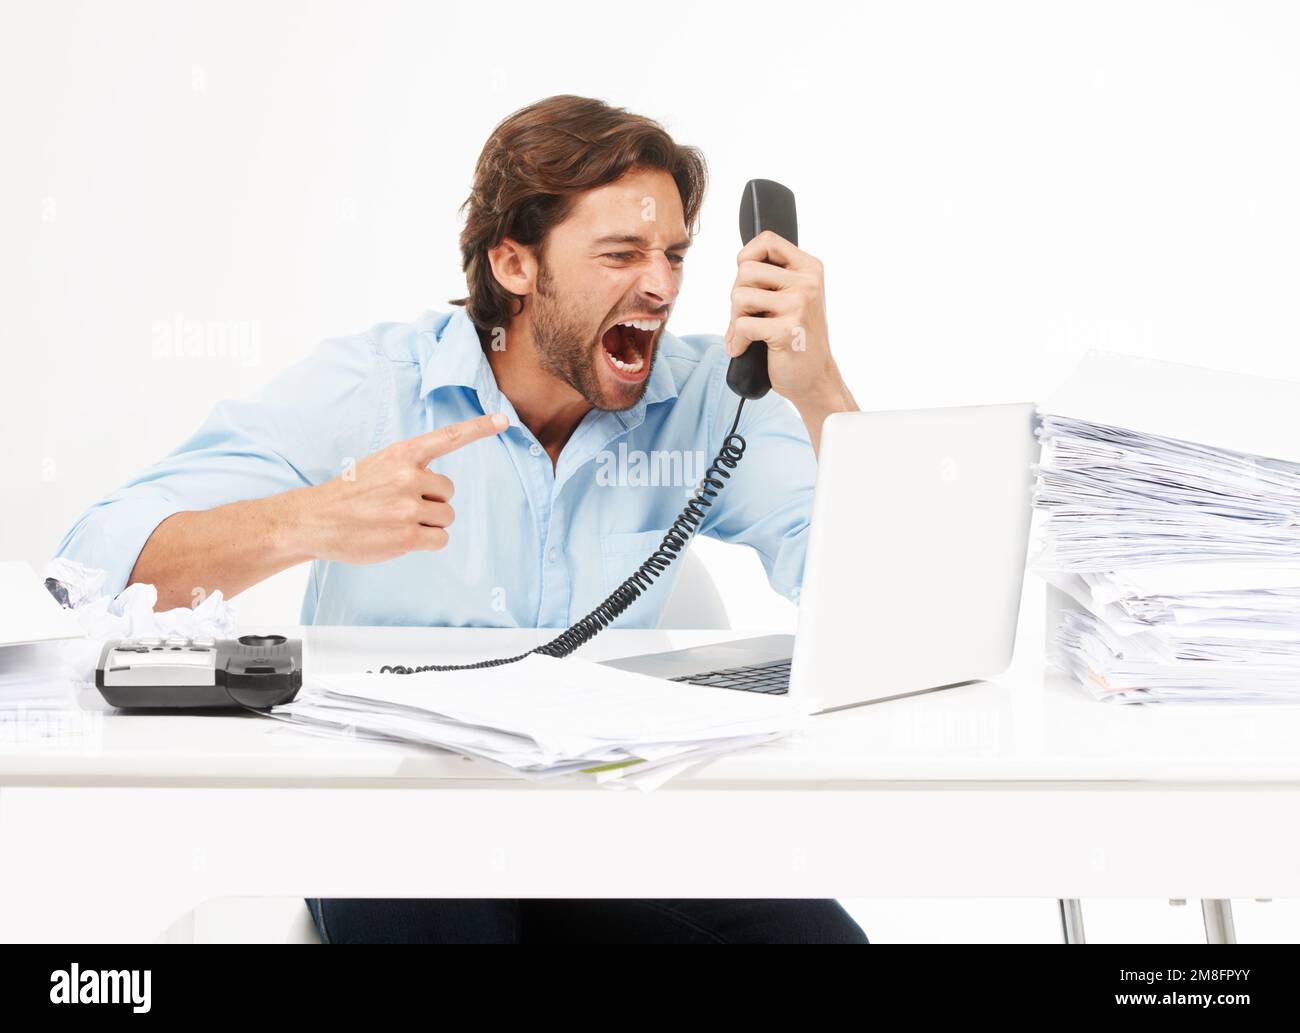 Telephone call, shout and business man angry over bad tech support, poor customer service or communication problem. Administration anger, accounting Stock Photo